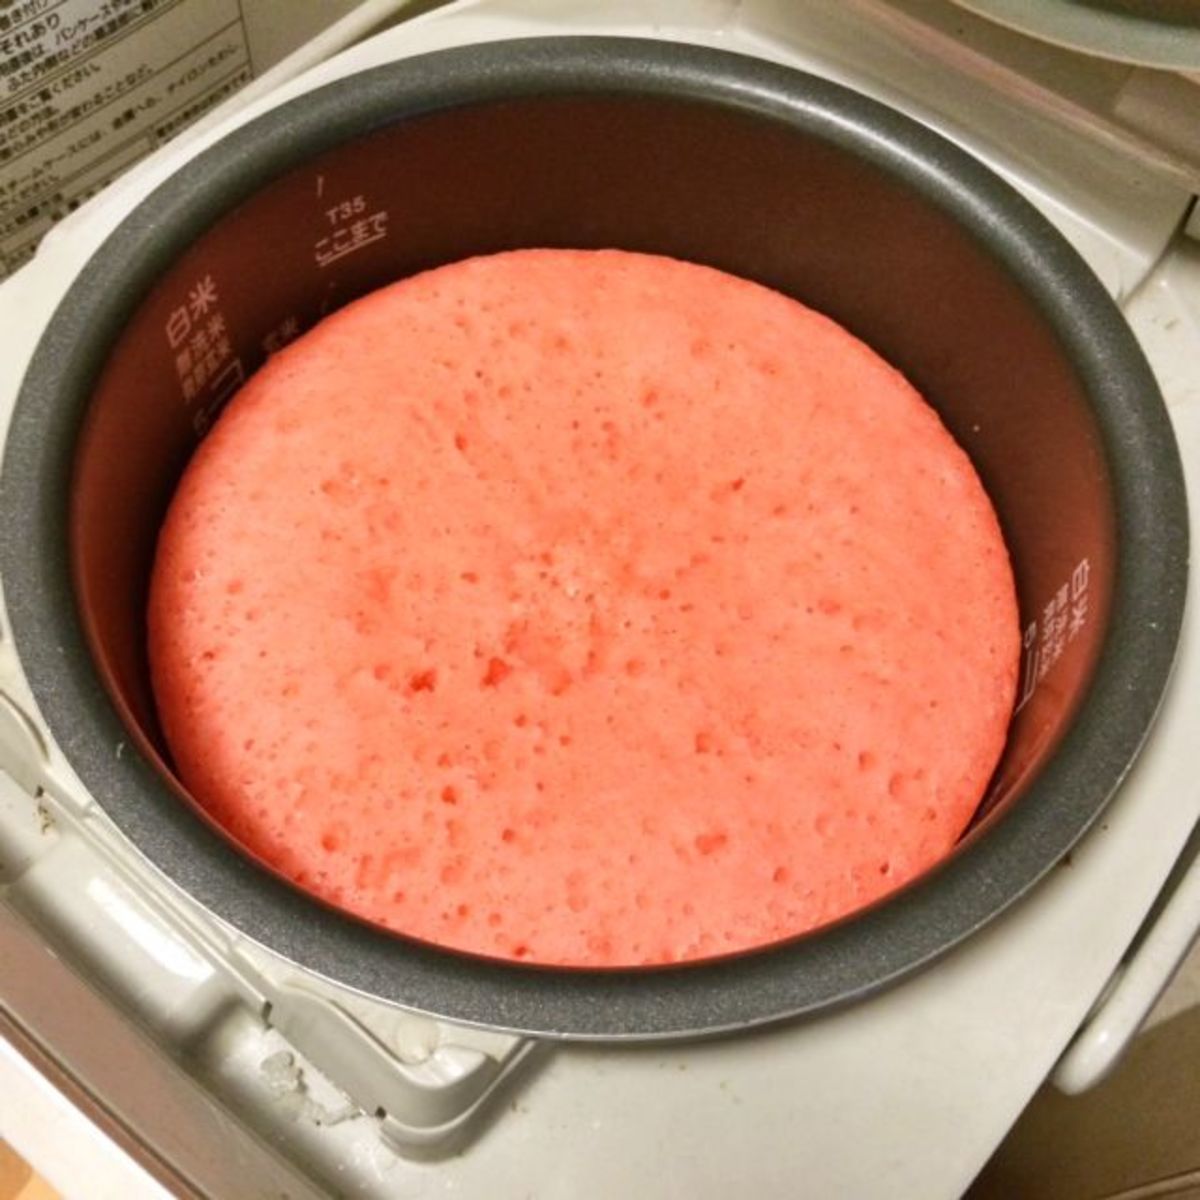 How To Make A Cake In A Rice Cooker